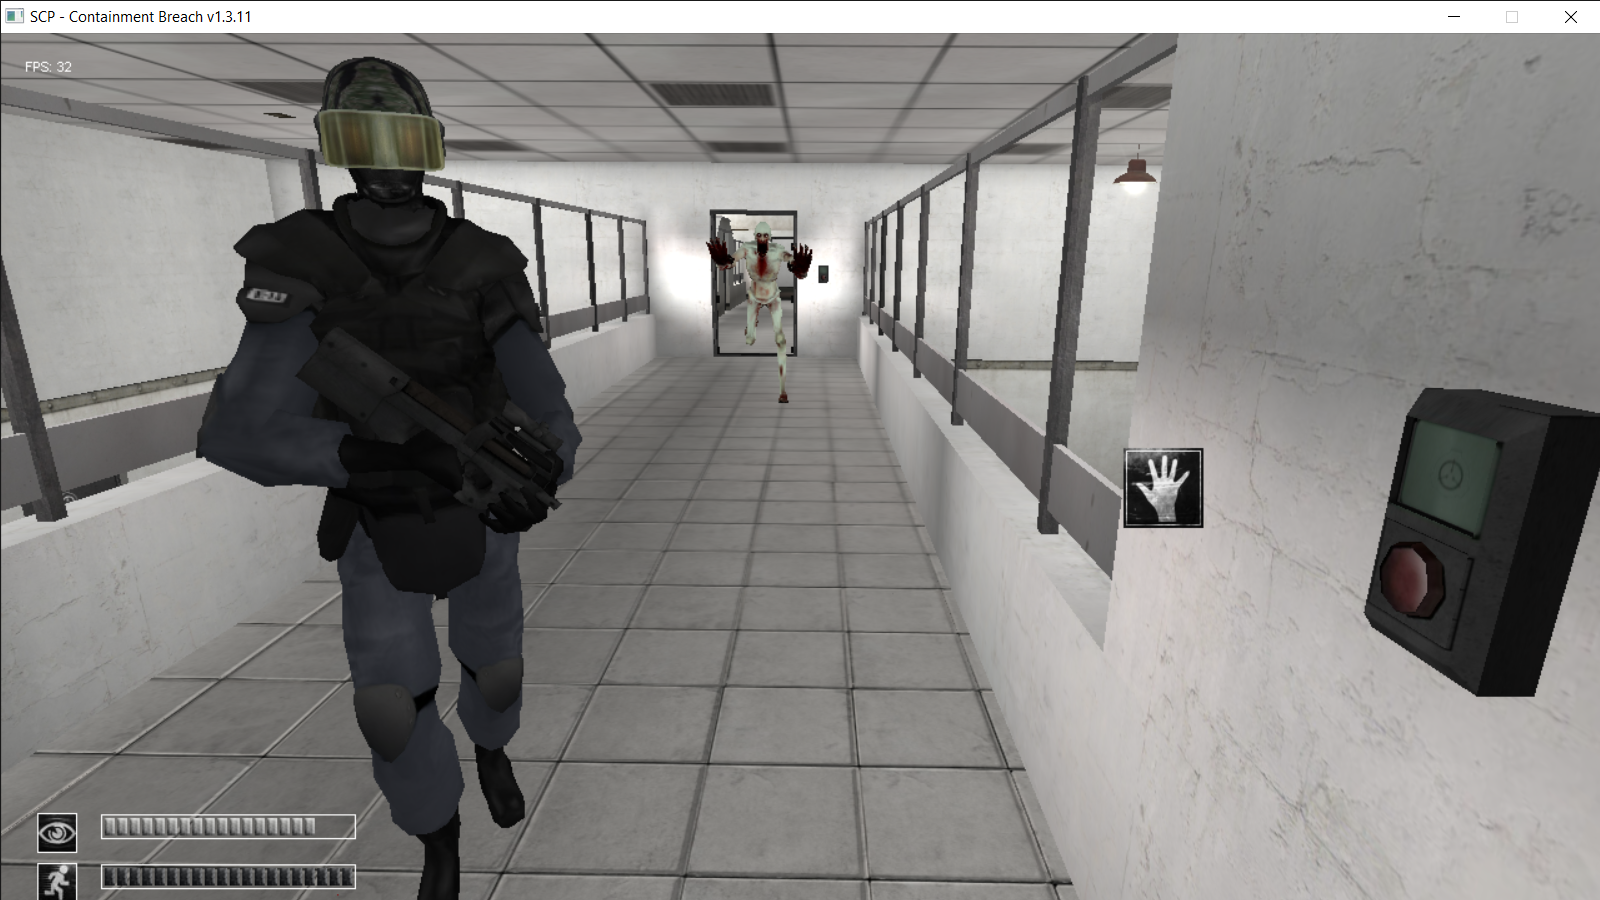 SCP - Containment is Magic Mod (V2.2.3) - Page 157 - Undertow Games Forum